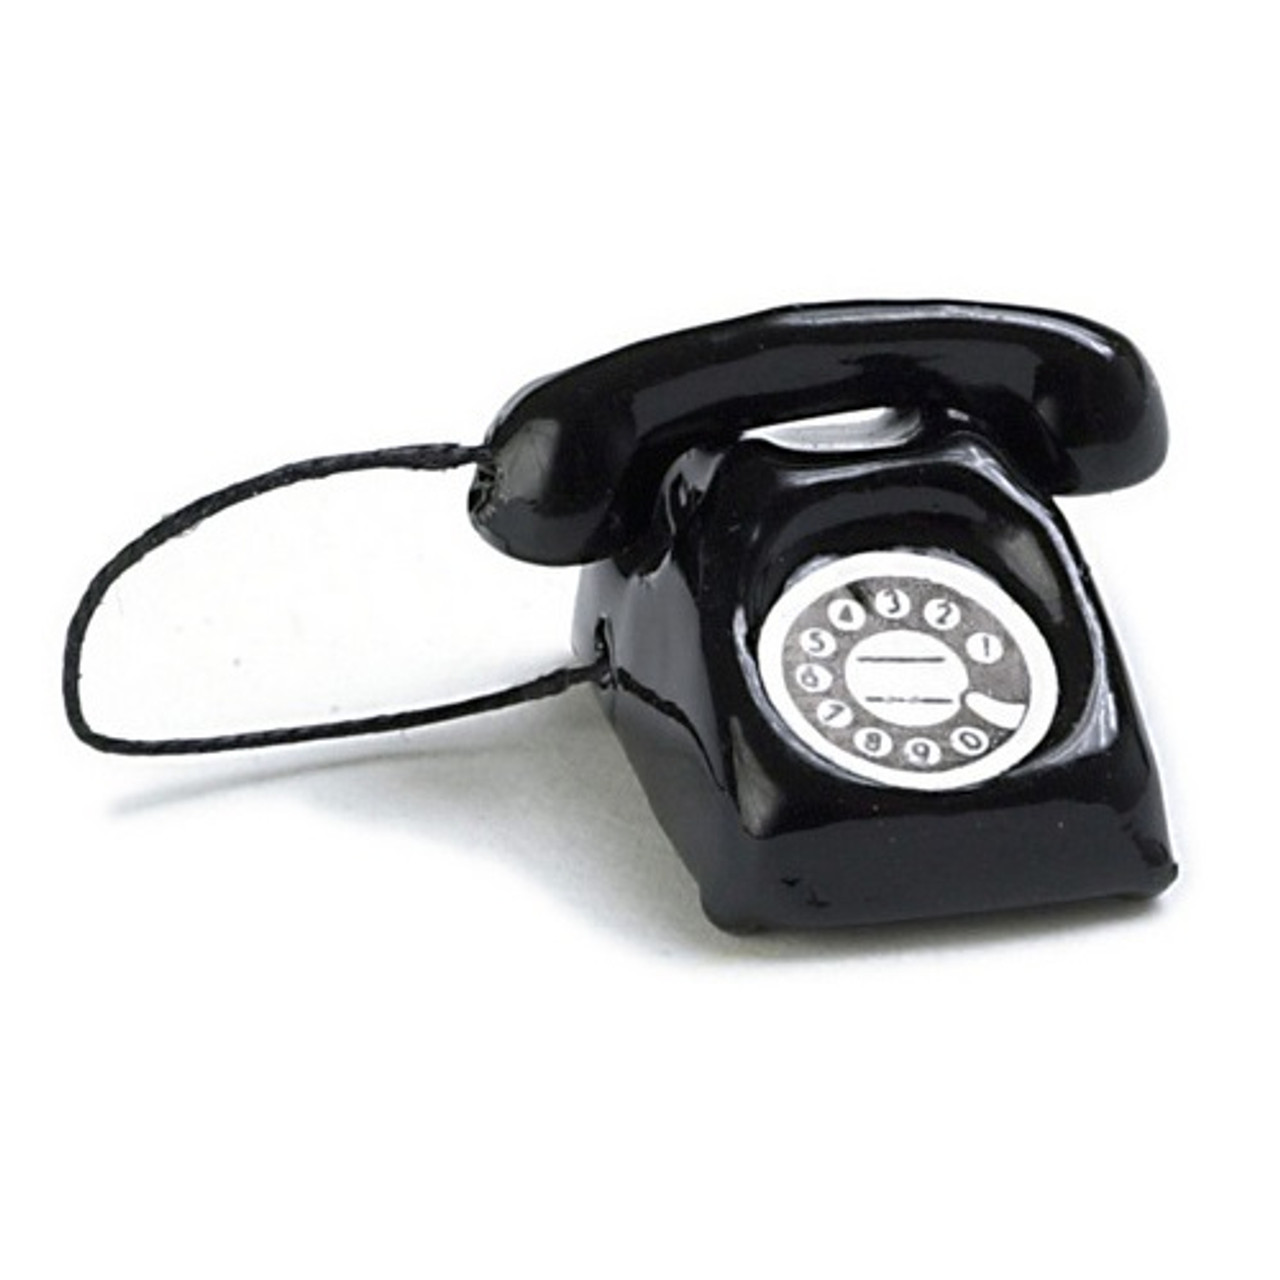 Image of miniature black rotary dial phone on white background